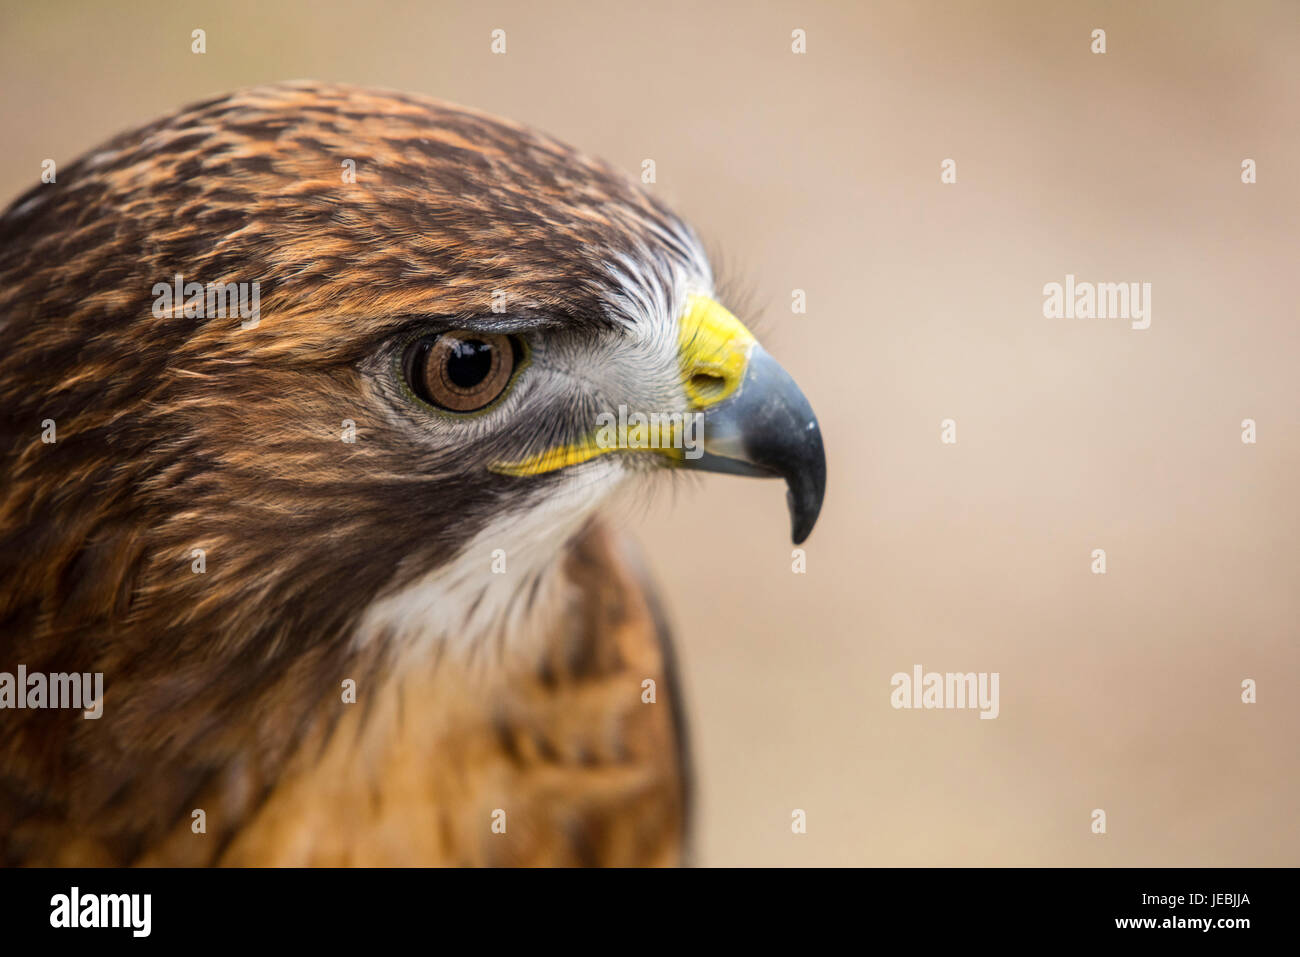 Red Tailed Hawk Stockfoto